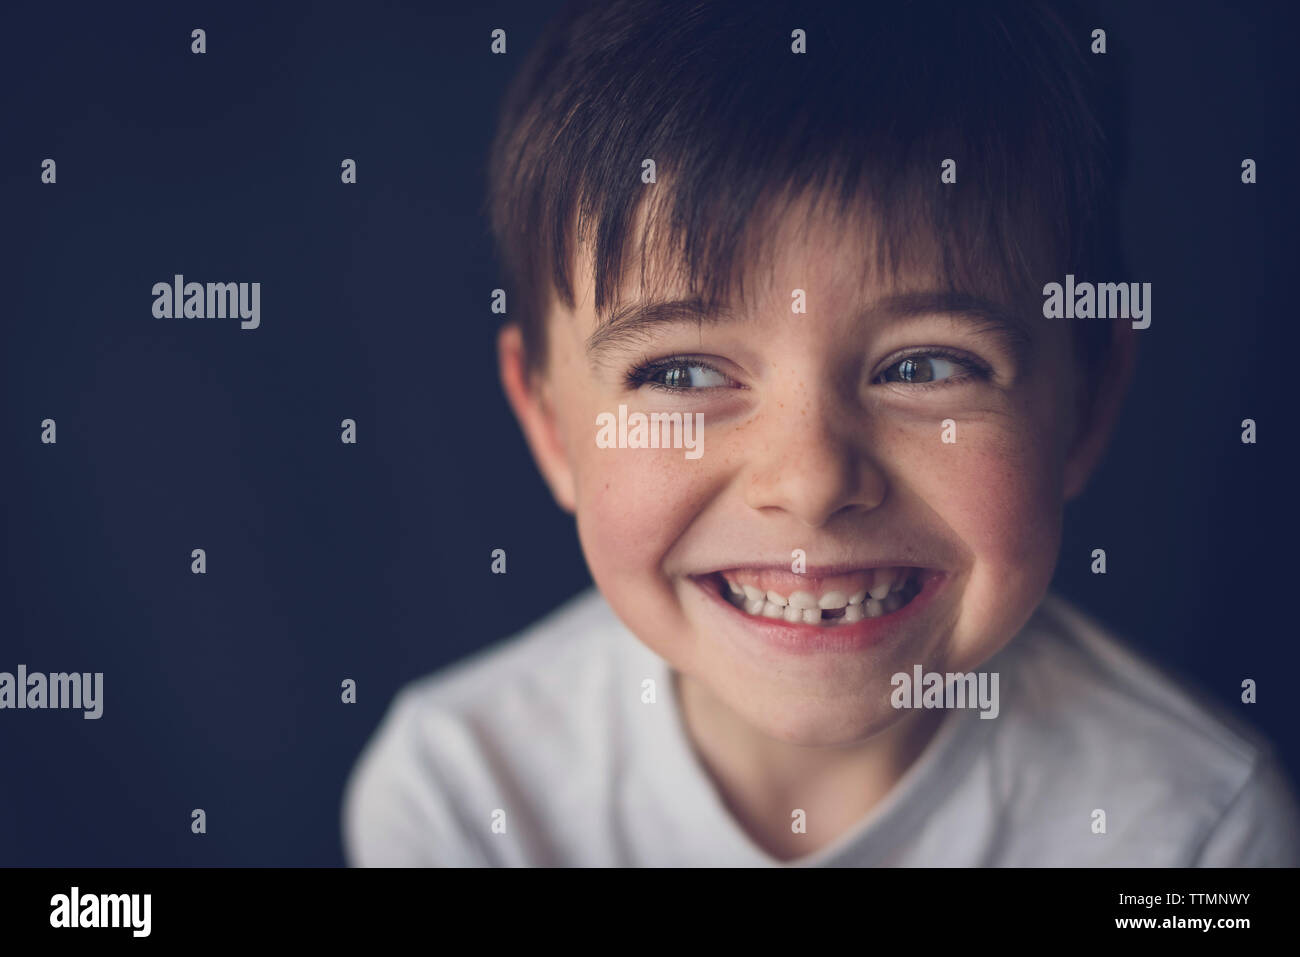 Close-up of cheerful boy clenching teeth while looking through sideways glance Stock Photo